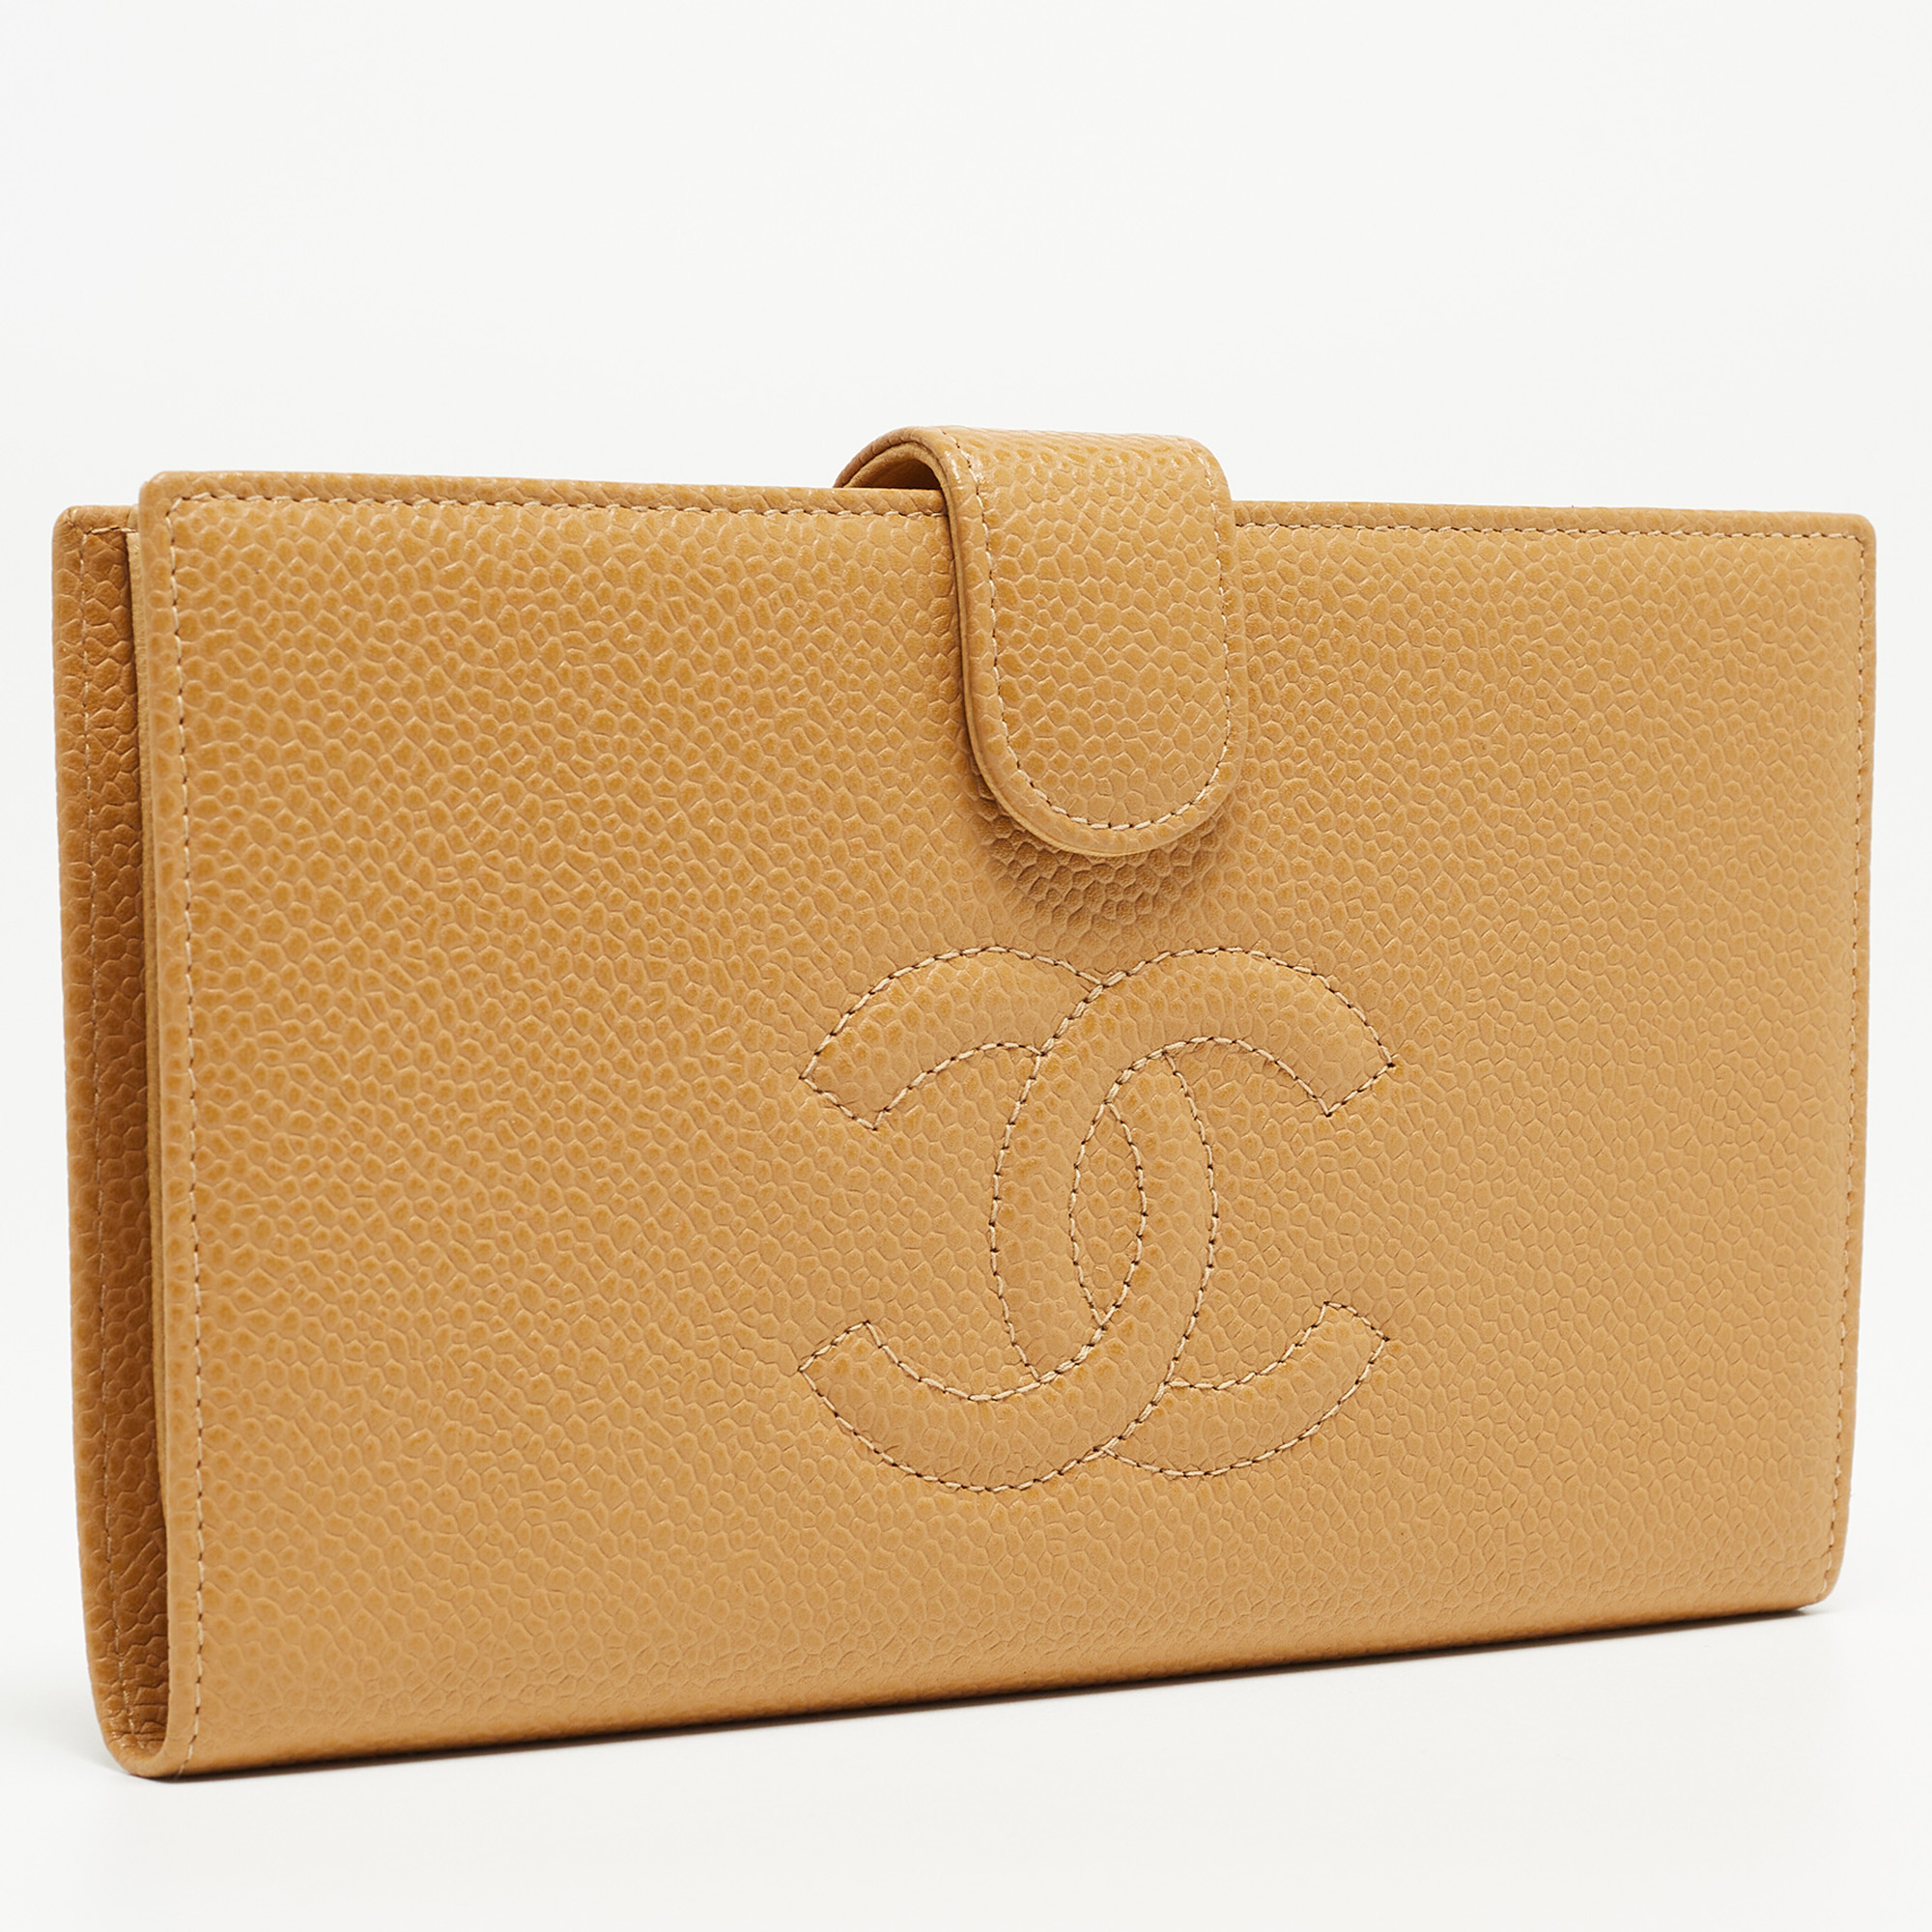 Chanel Beige CC Caviar Leather CC Timeless French Wallet